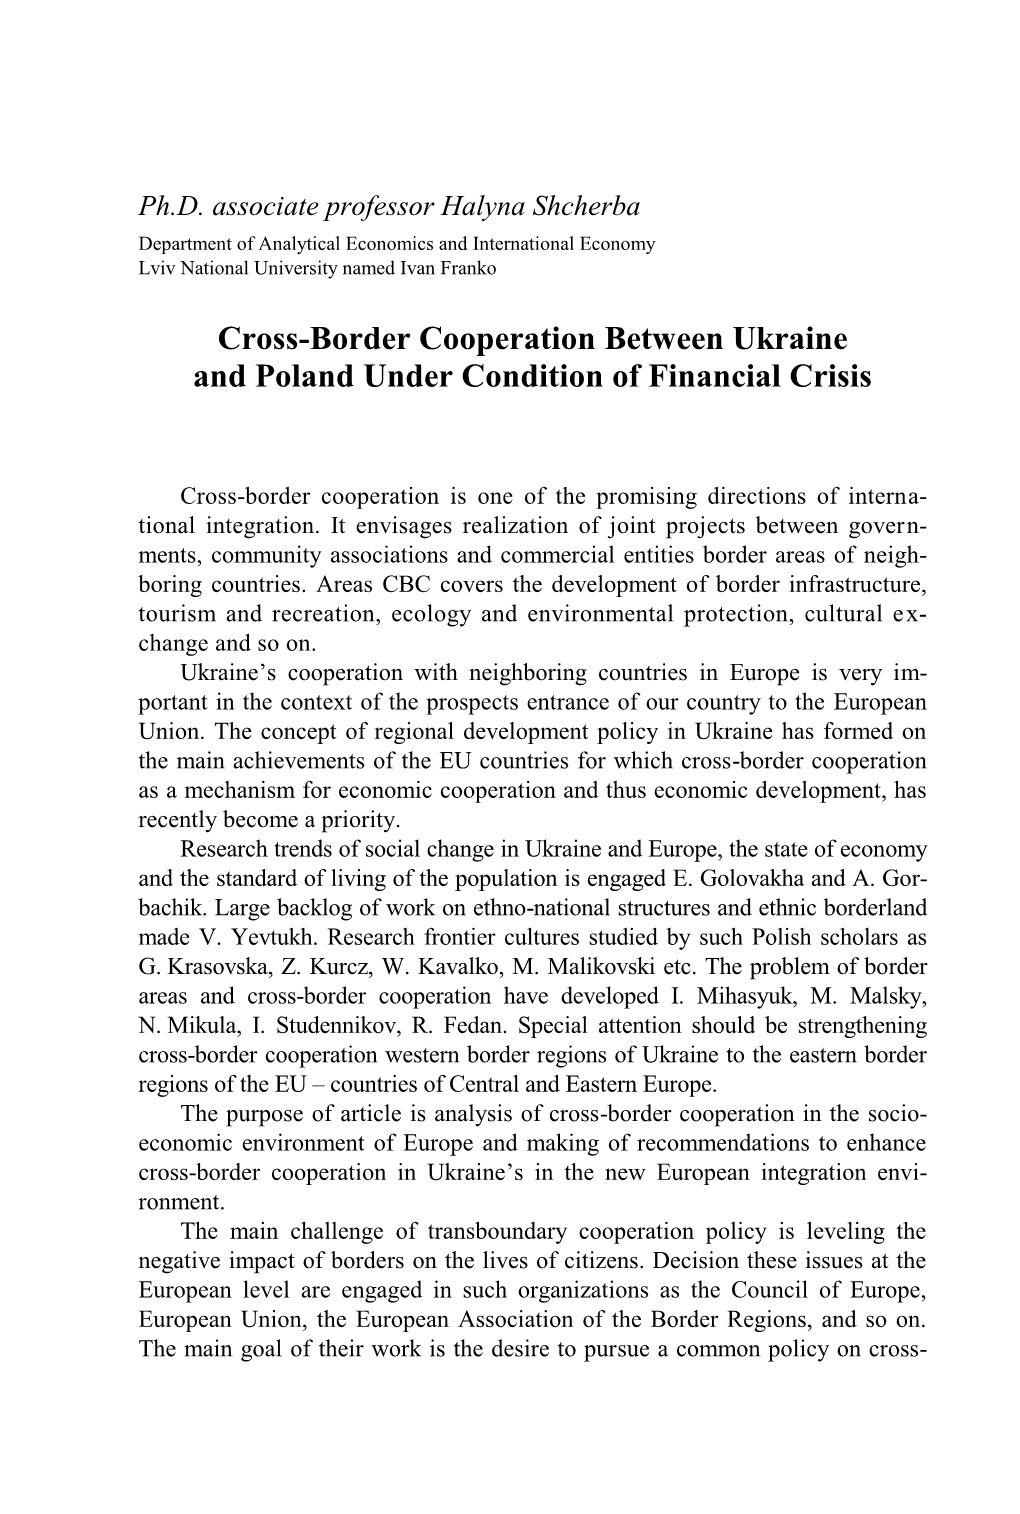 Cross-Border Cooperation Between Ukraine and Poland Under Condition of Financial Crisis